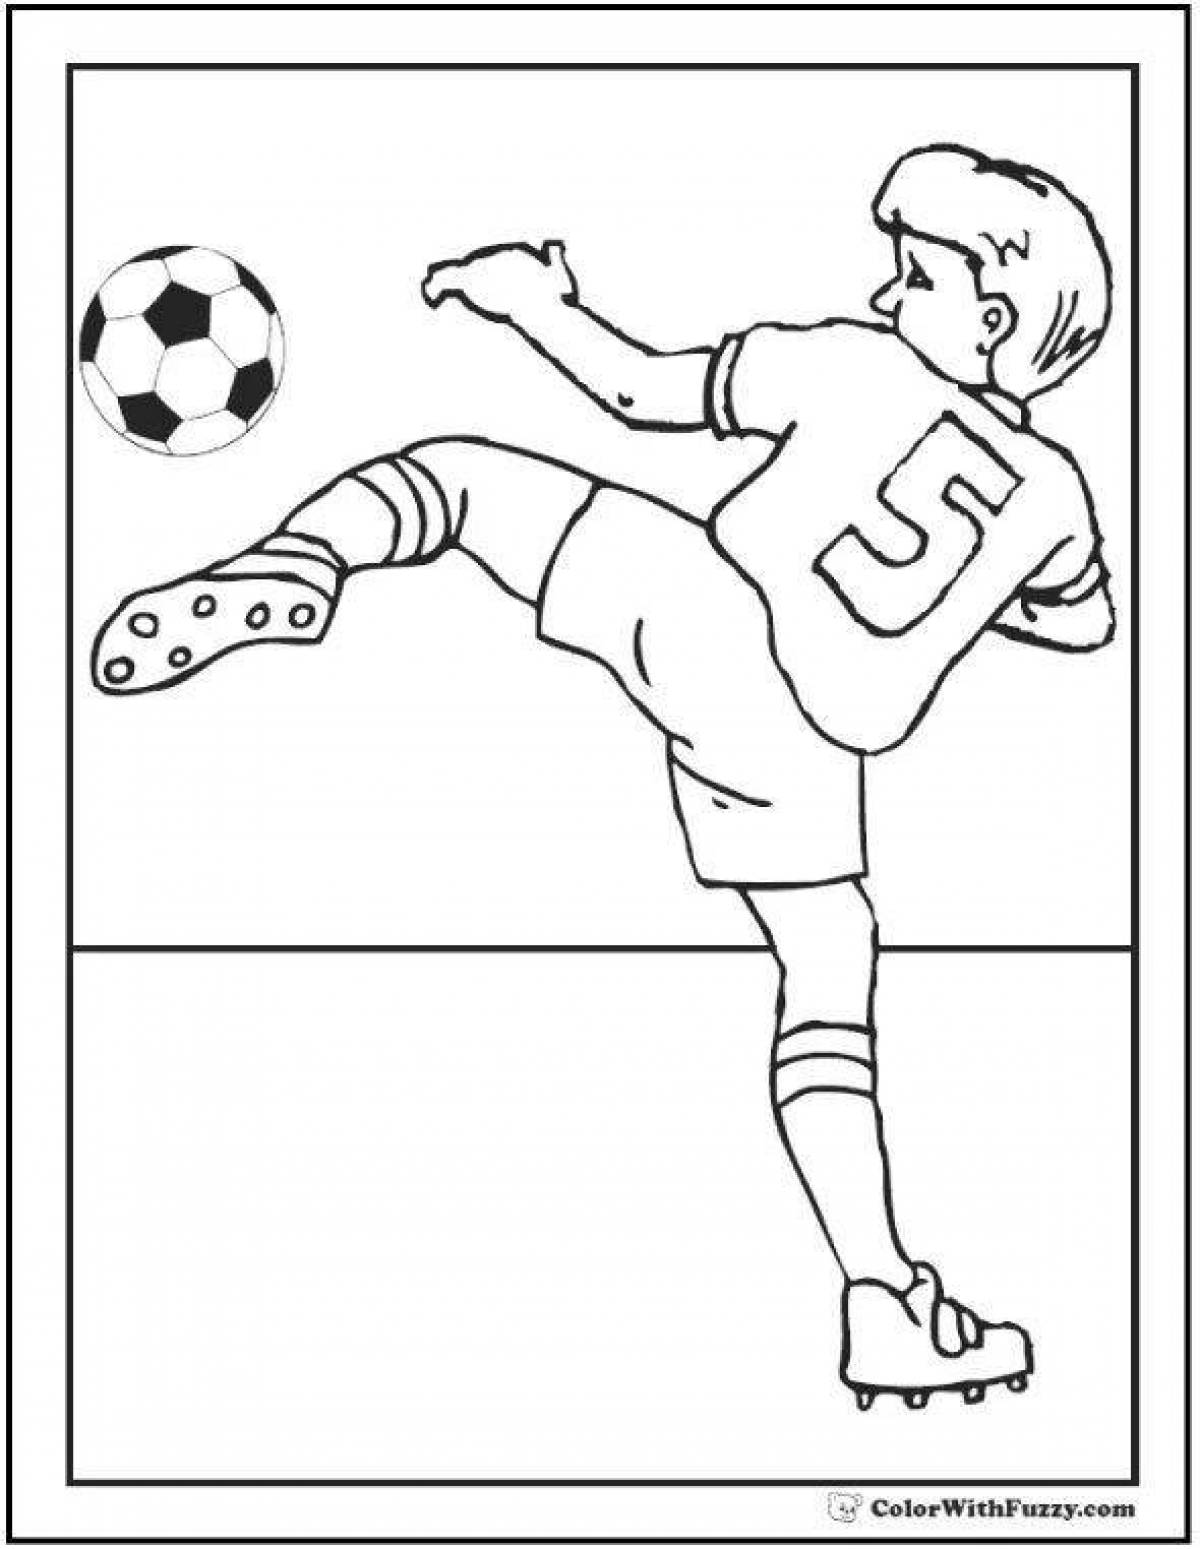 Attractive football player coloring book for kids